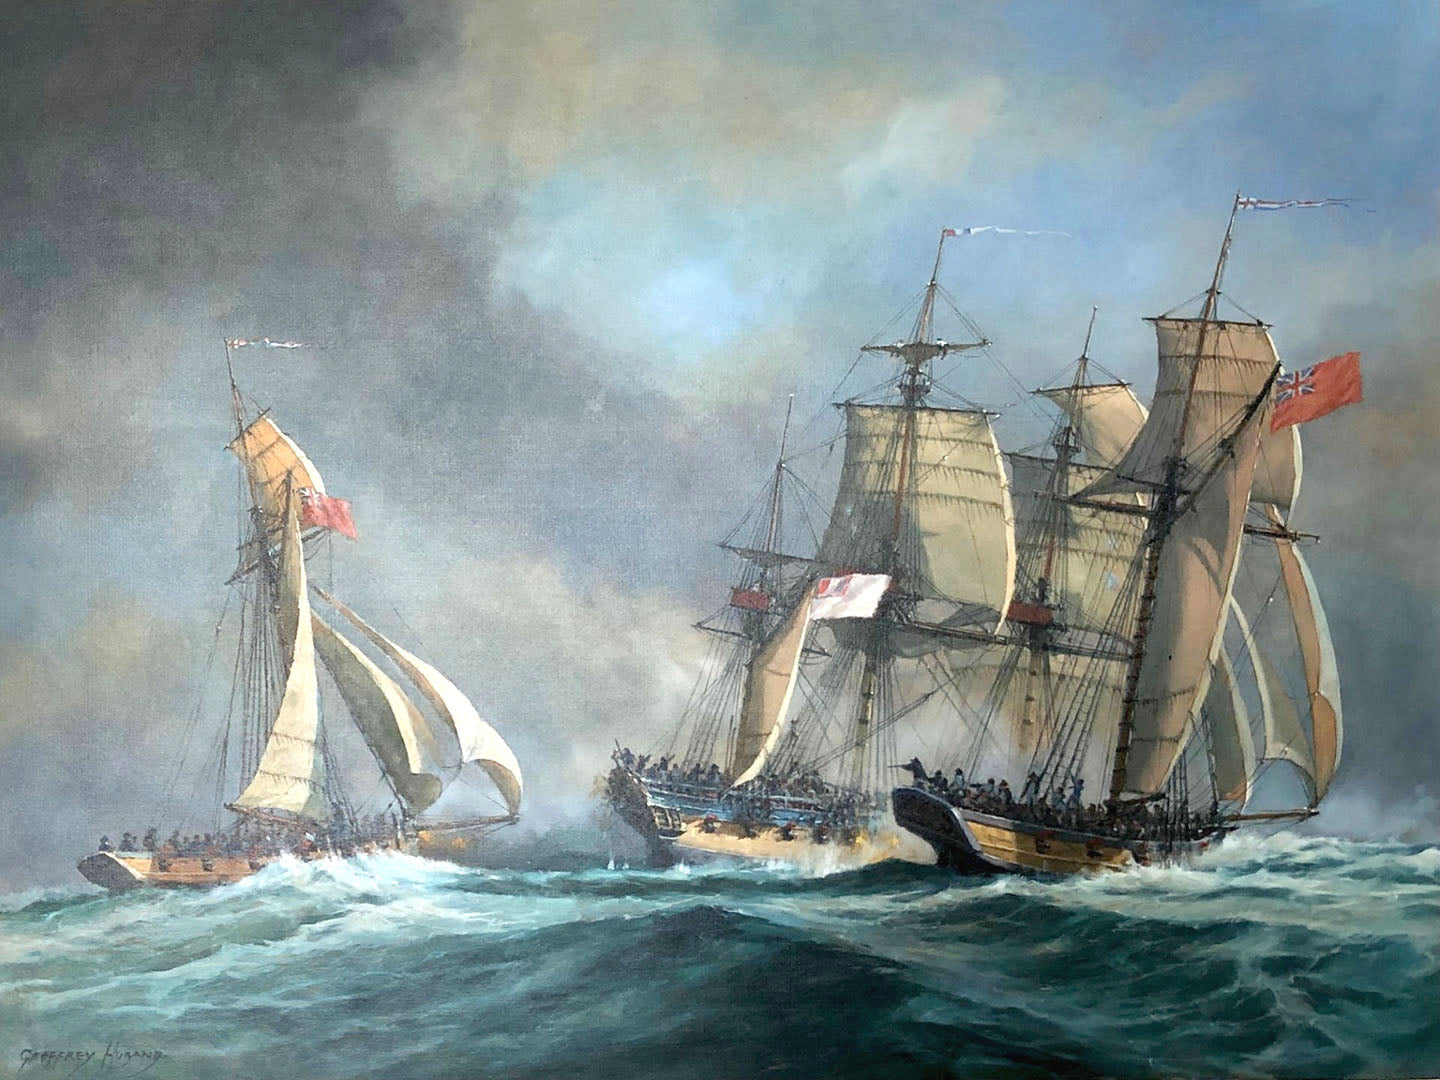 A French Corvette harried by Naval Cutters - Geoffrey Huband